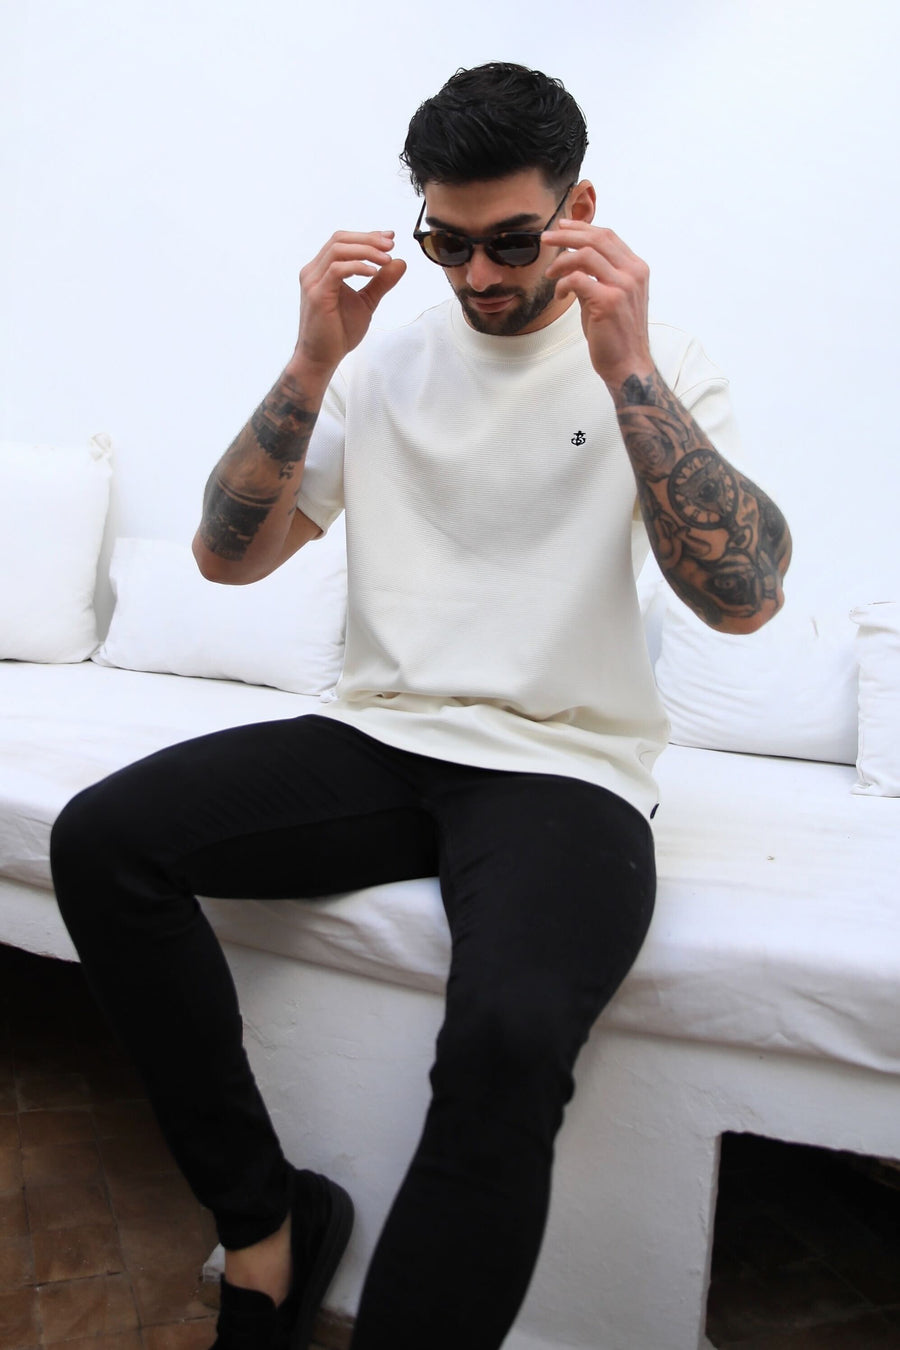 Ceuta Relaxed T-Shirt - Off White